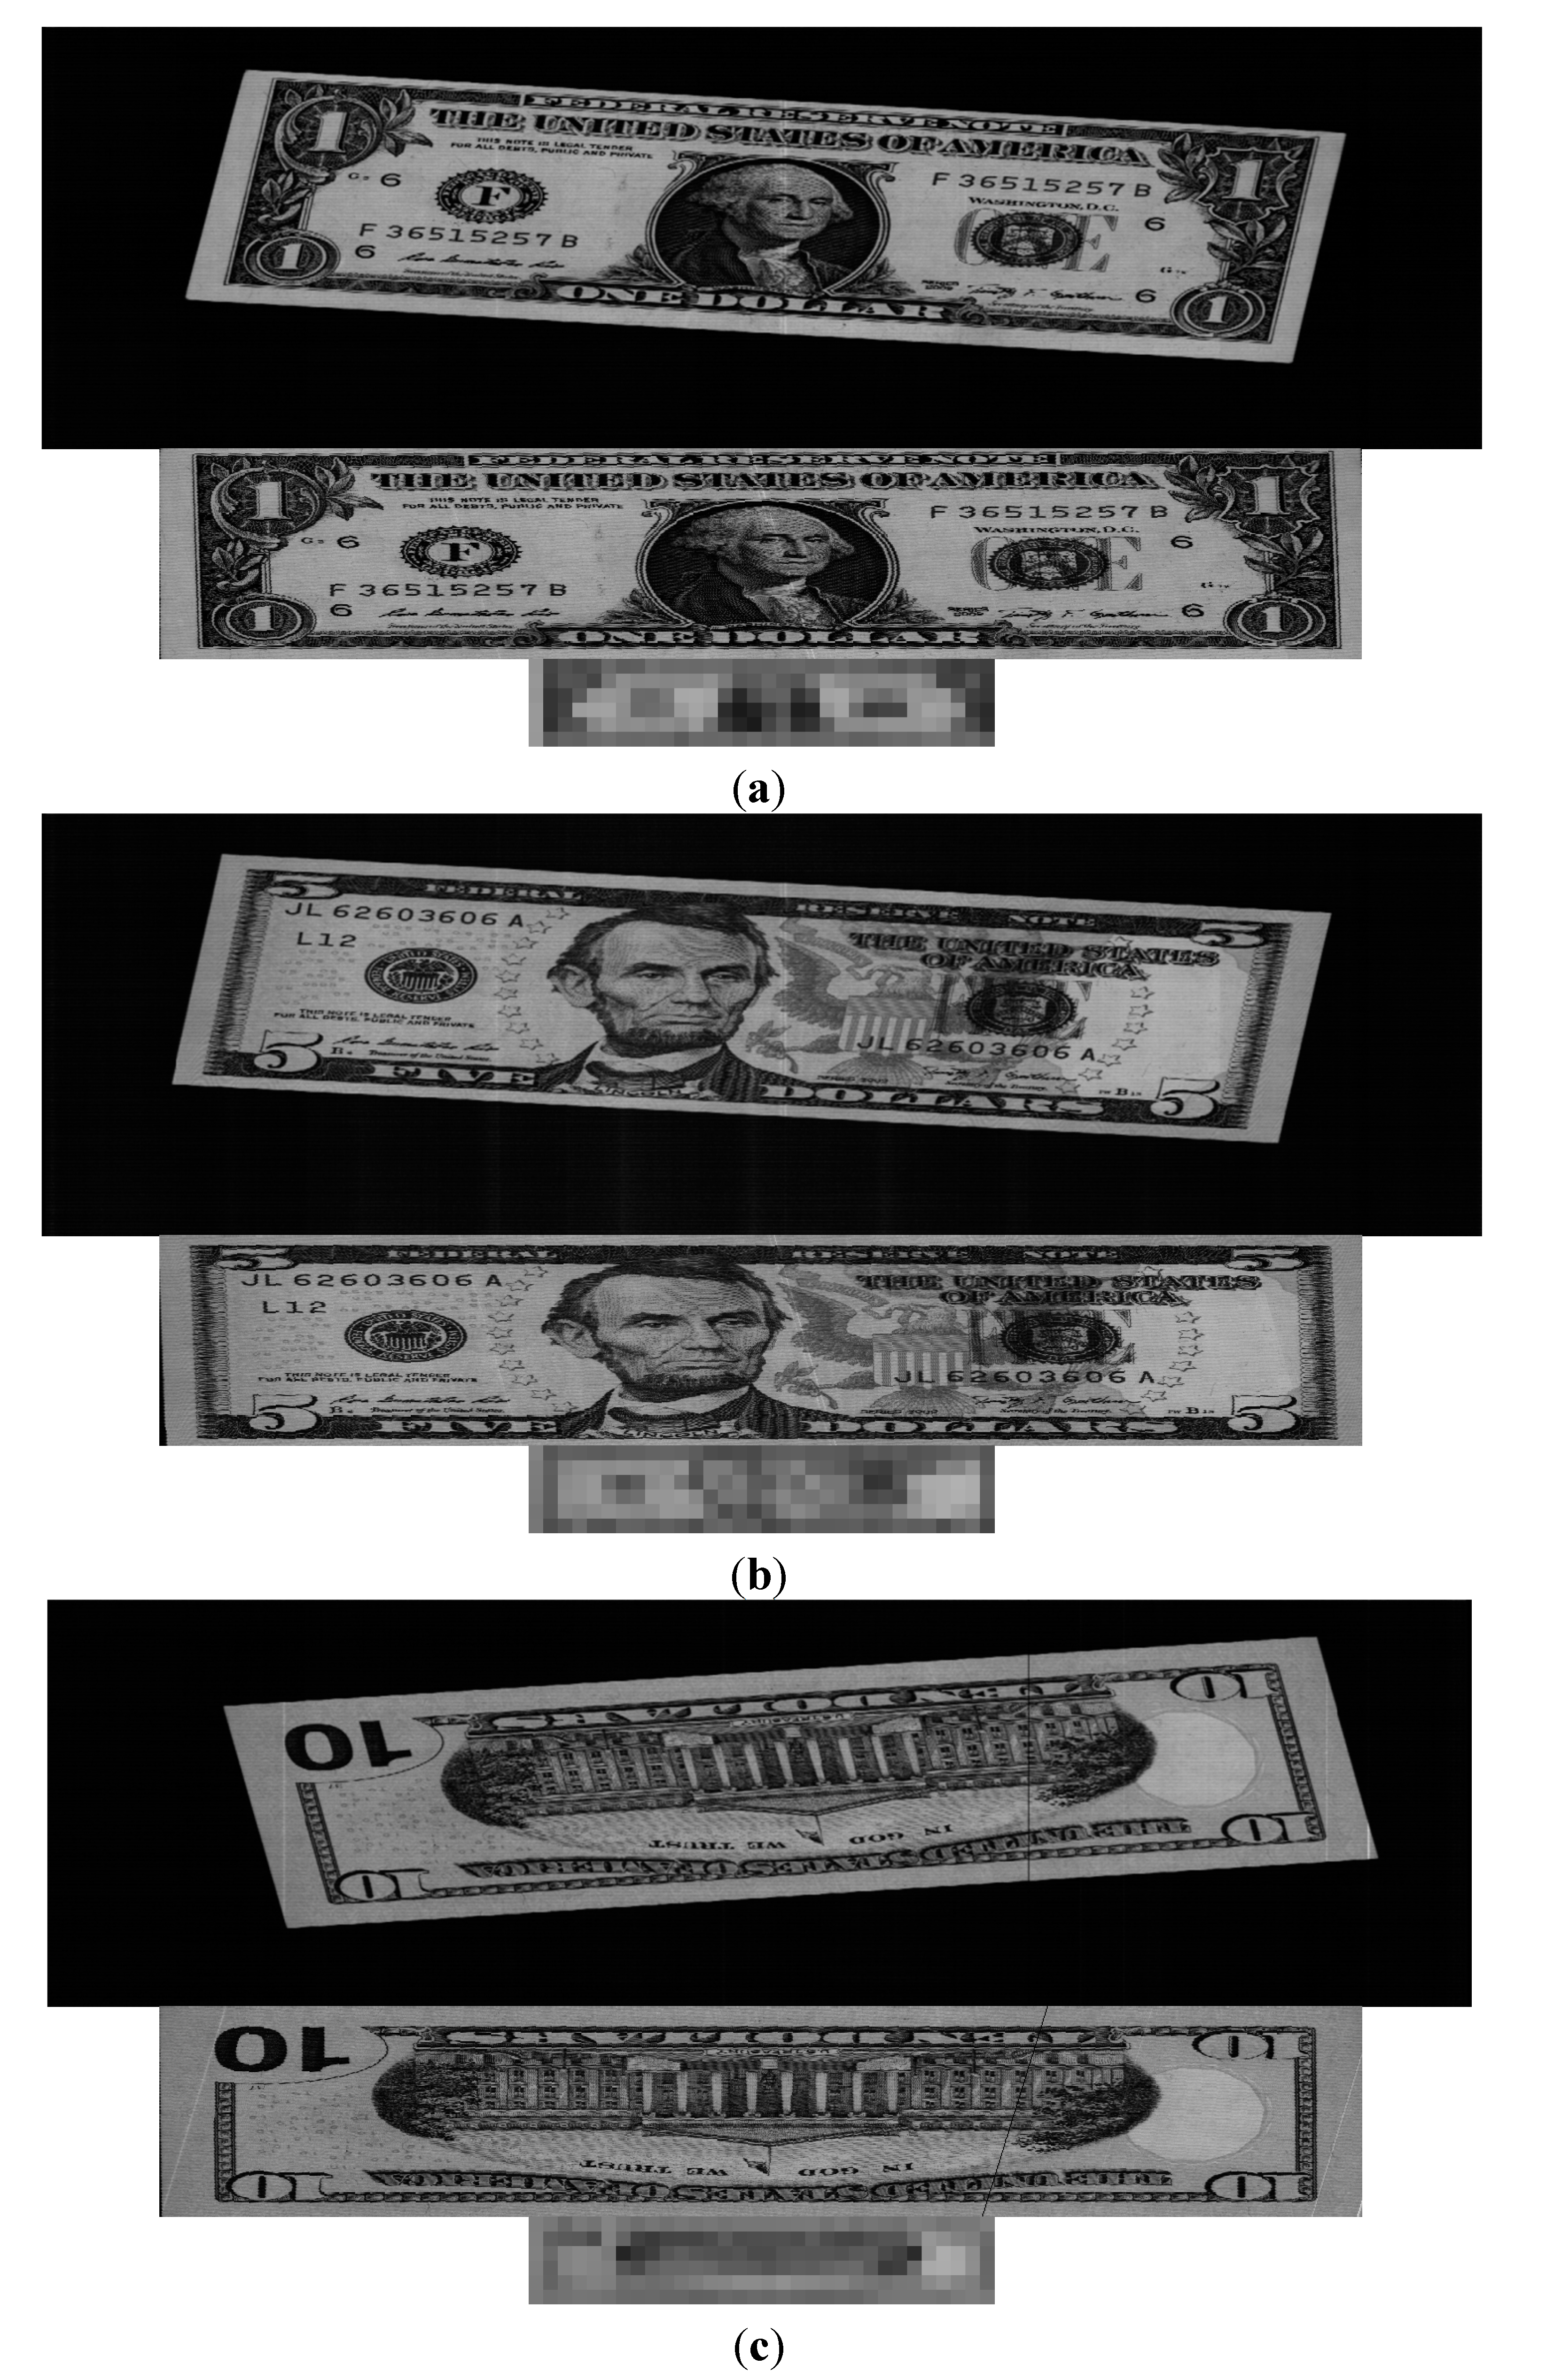 Sensors | Free Full-Text | A High Performance Banknote Recognition System  Based on a One-Dimensional Visible Light Line Sensor | HTML